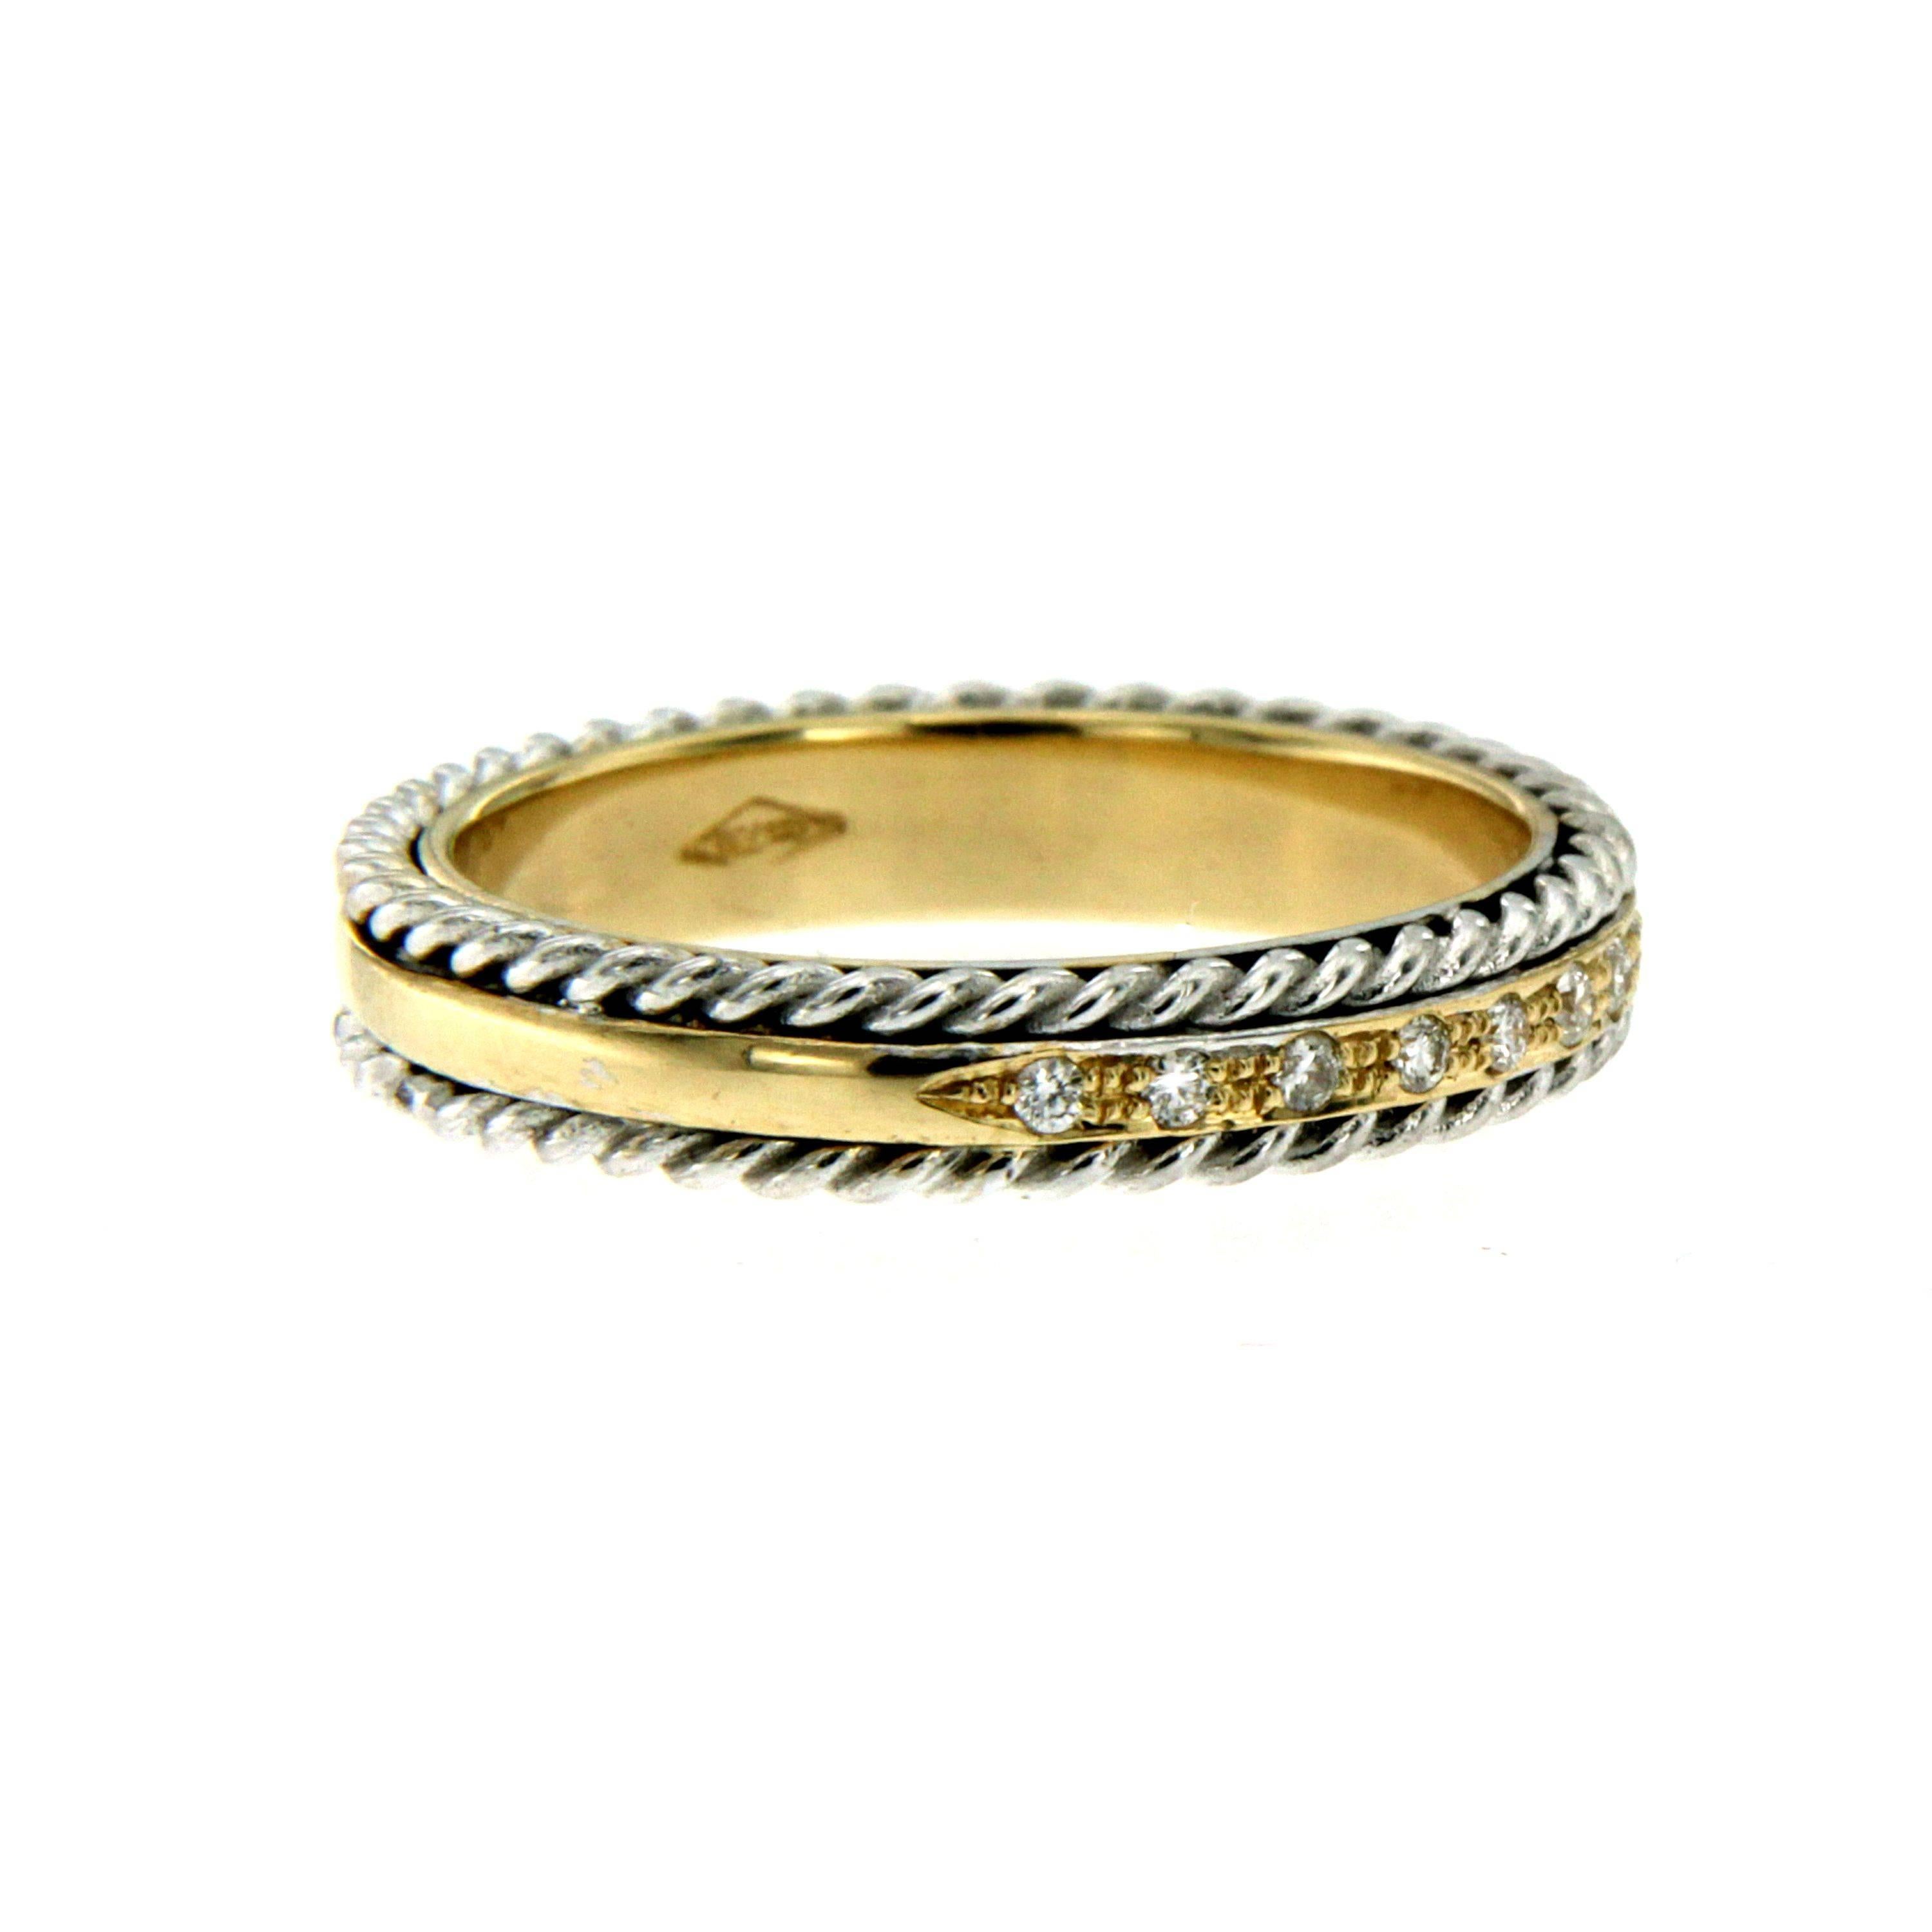 A gorgeous 18k gold band ring set with 0.10 cts of Diamonds, comprised of a high polished yellow gold background, upon which are soldered two twisted rope motifs.

CONDITION: Brand New 
METAL: 18k yellow and white Gold
GEM STONE: Diamond 0.10 total